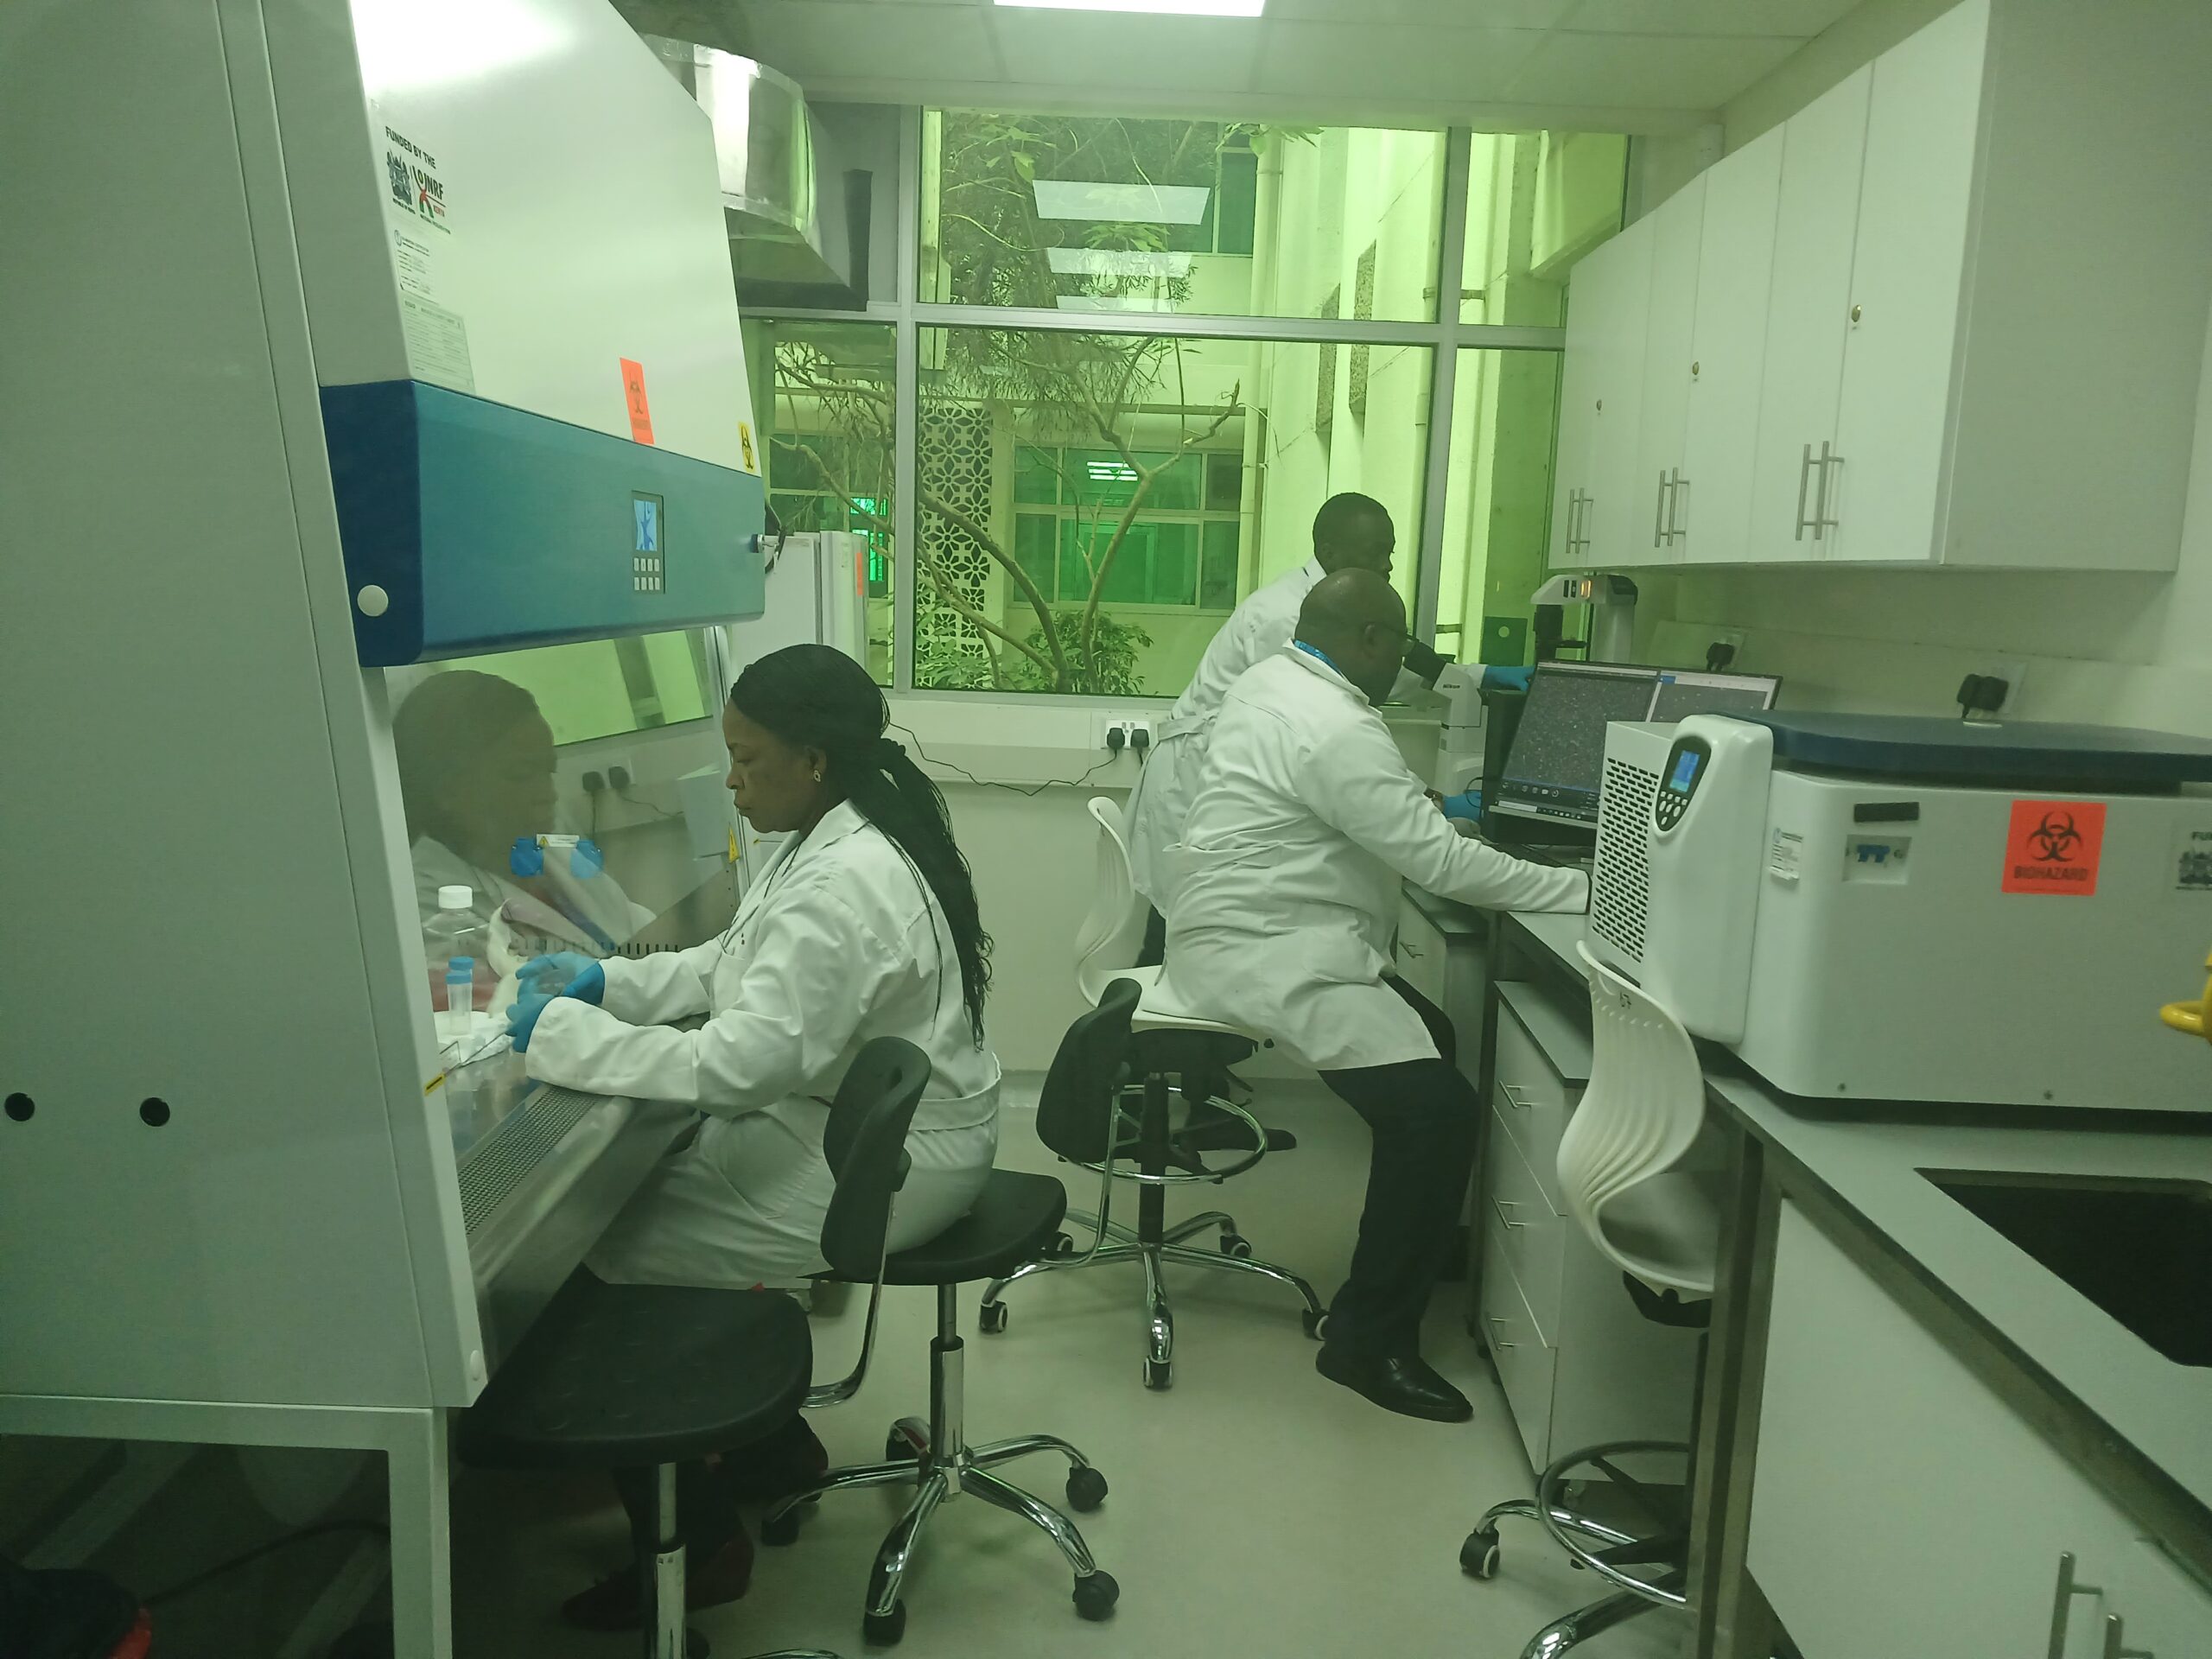 Kenya opens sub-Saharan Africa’s first stem cell research laboratory